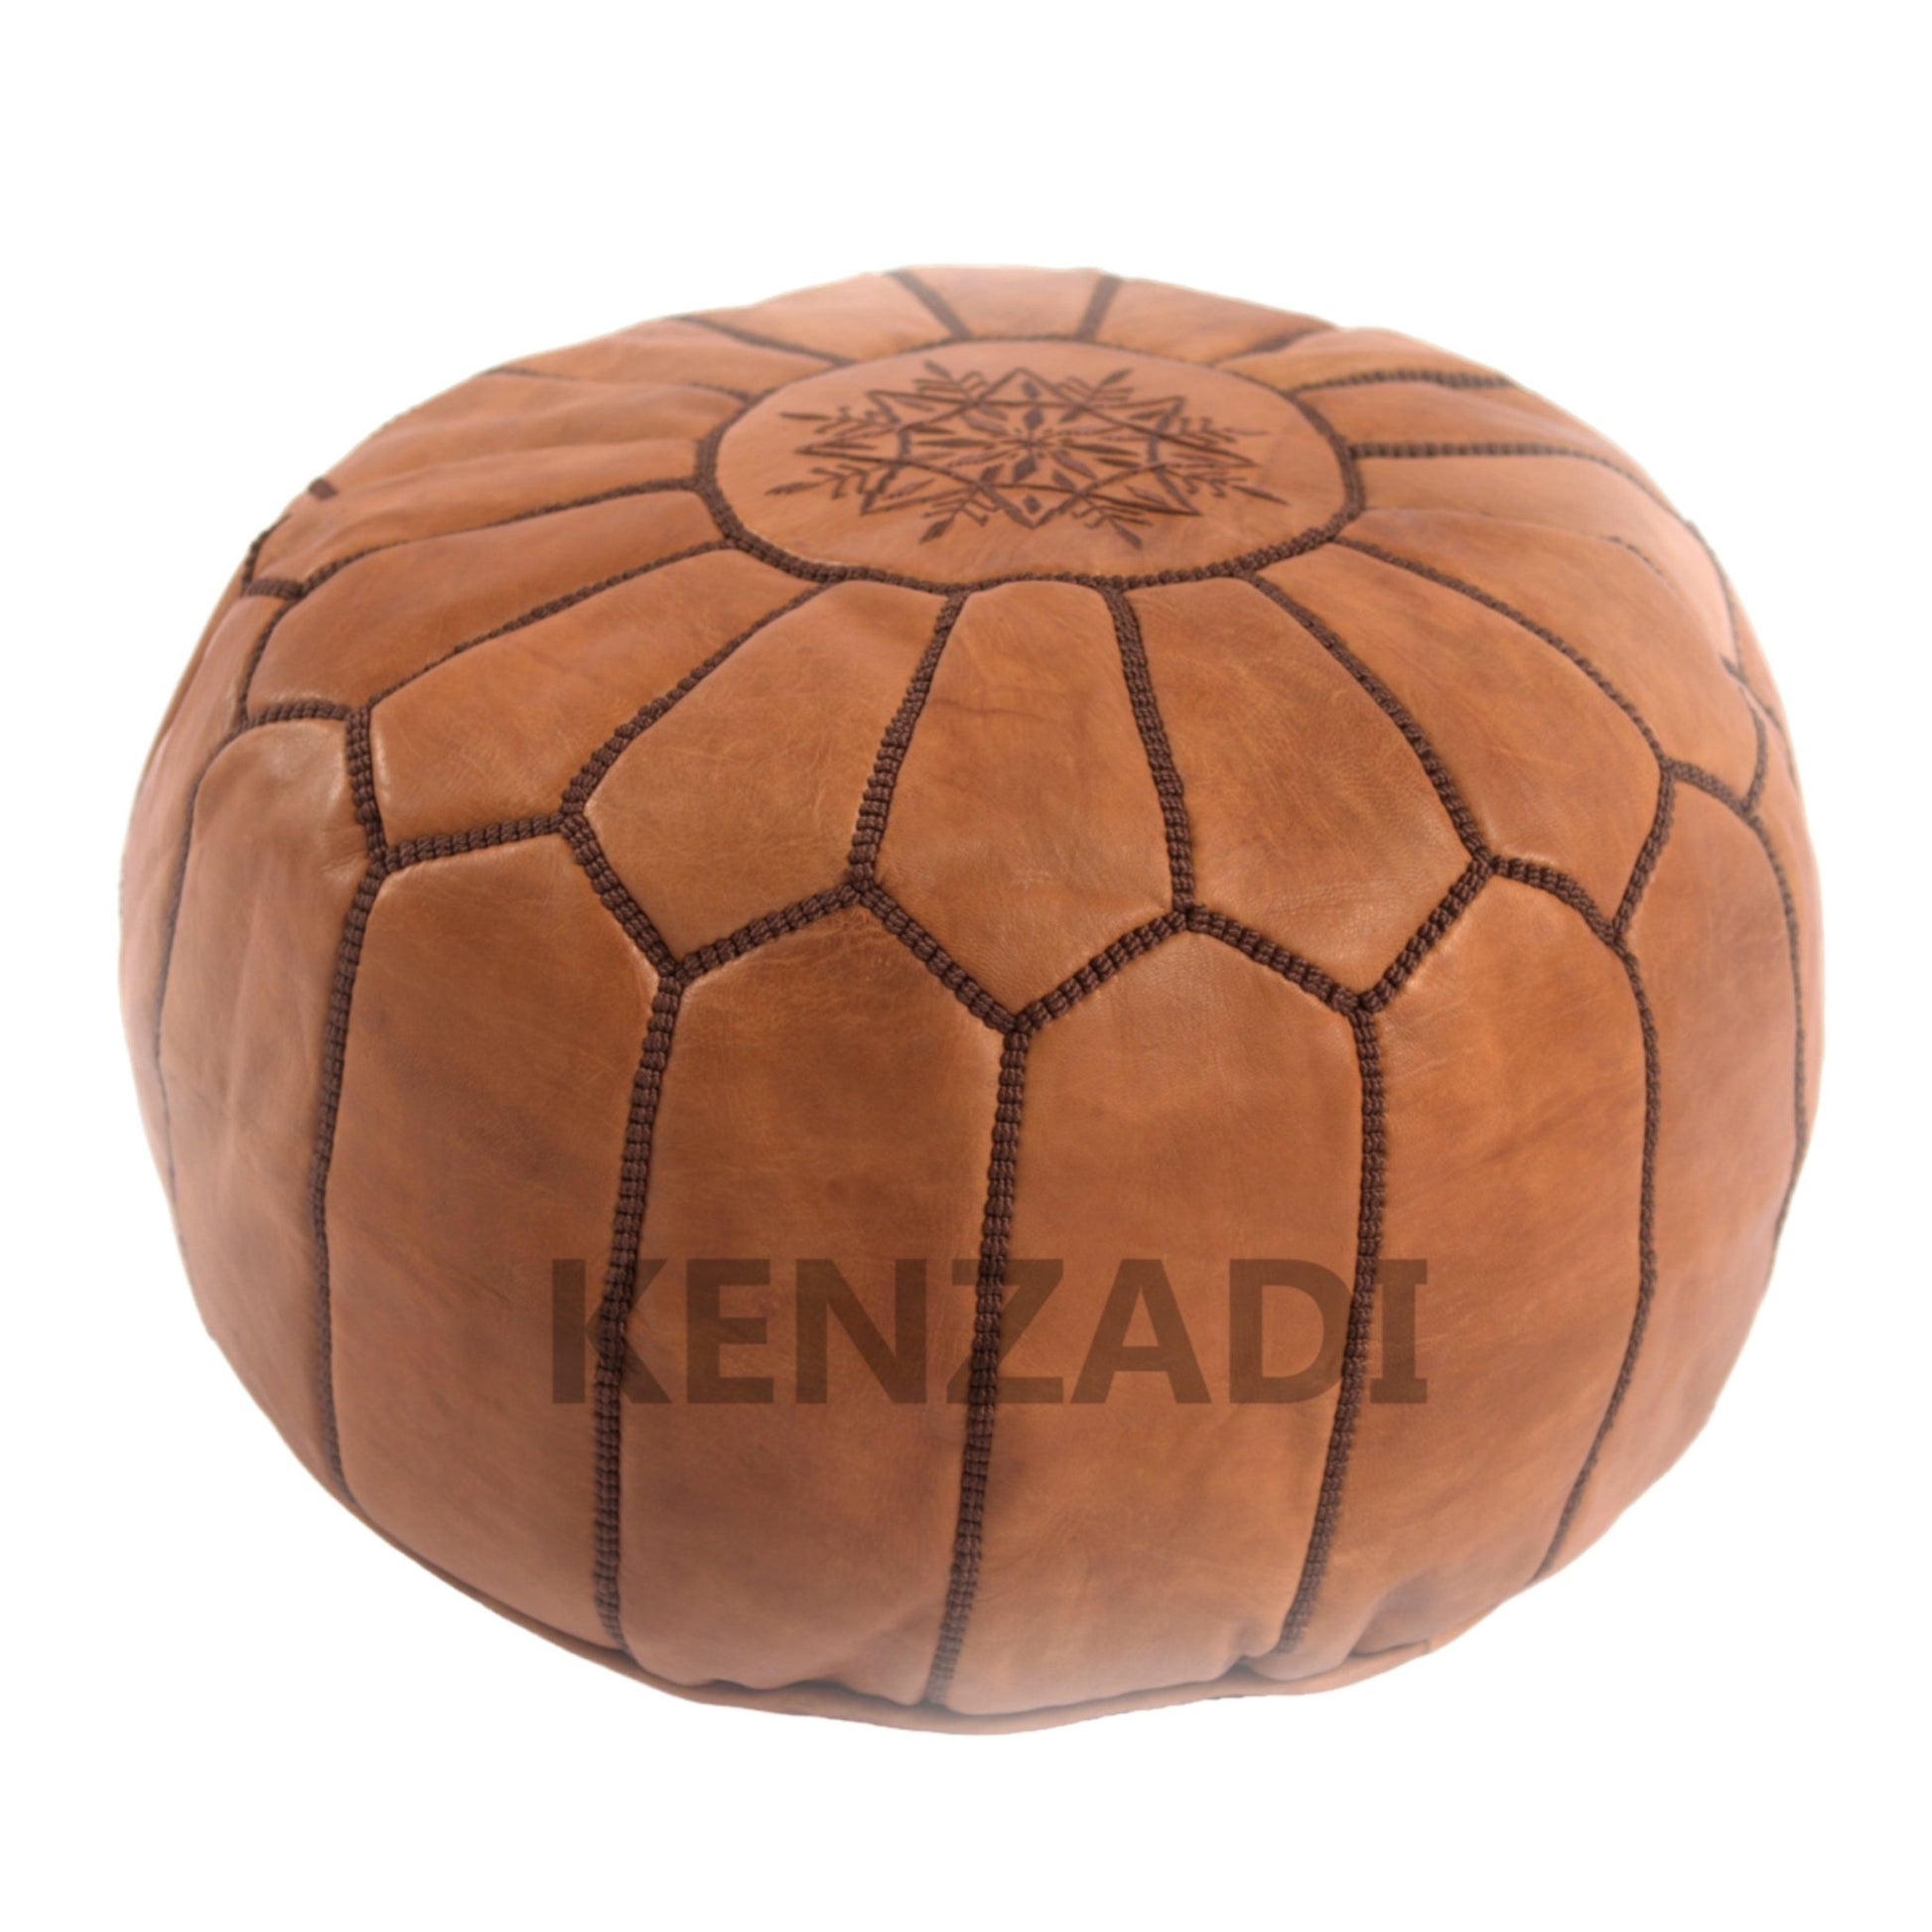 Moroccan leather pouf, round pouf, berber pouf, brown pouf with brown embroidery by Kenzadi - Handmade by My Poufs